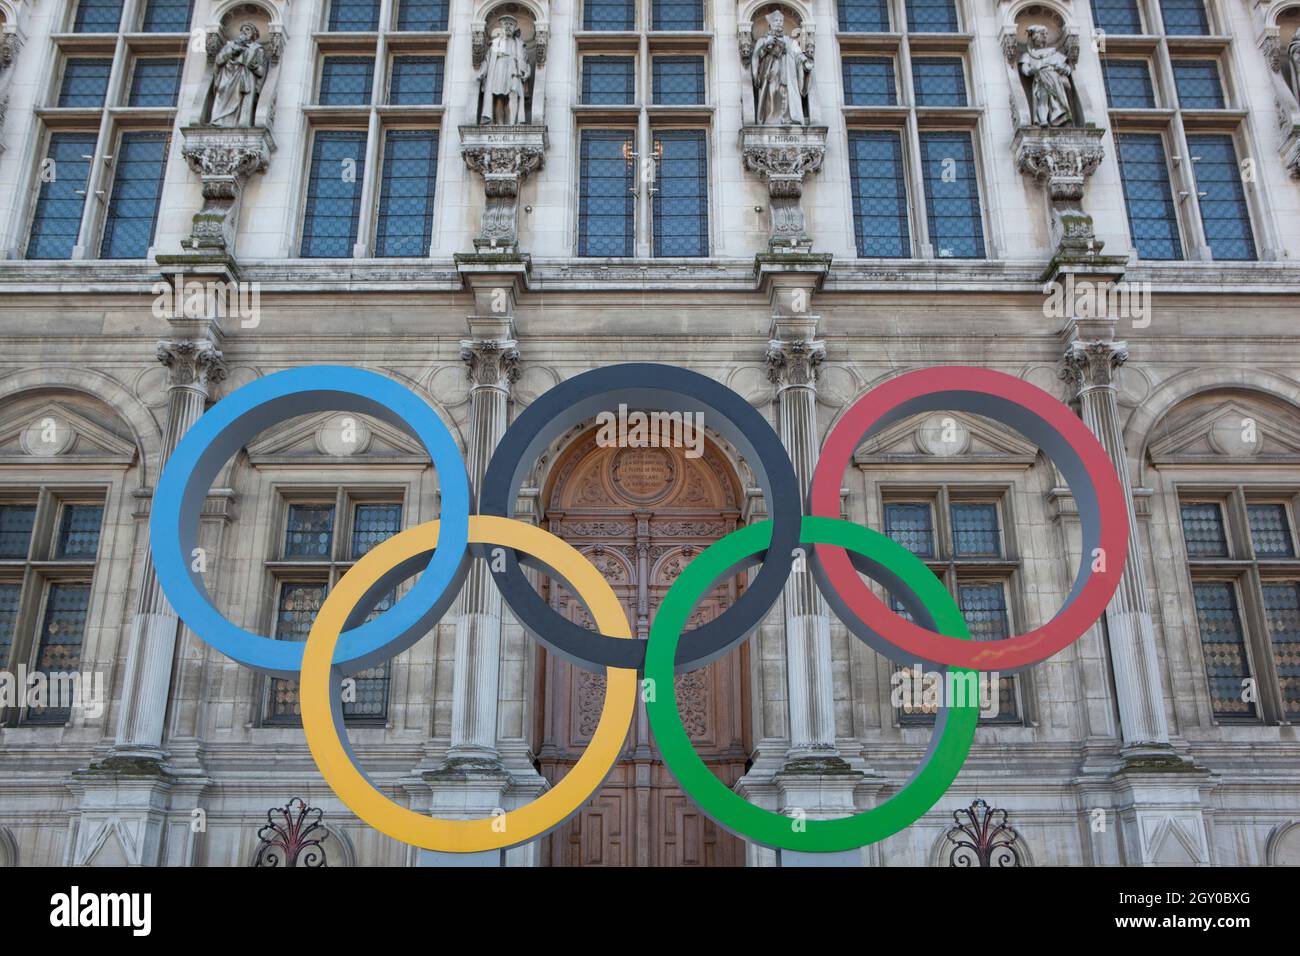 Leading 5 - What do Olympic 5 rings represent? #Olympic #5Rings #Games  #Tournament #Countries #Continents #Sports #Players #Play #Fit #Leading5 |  Facebook